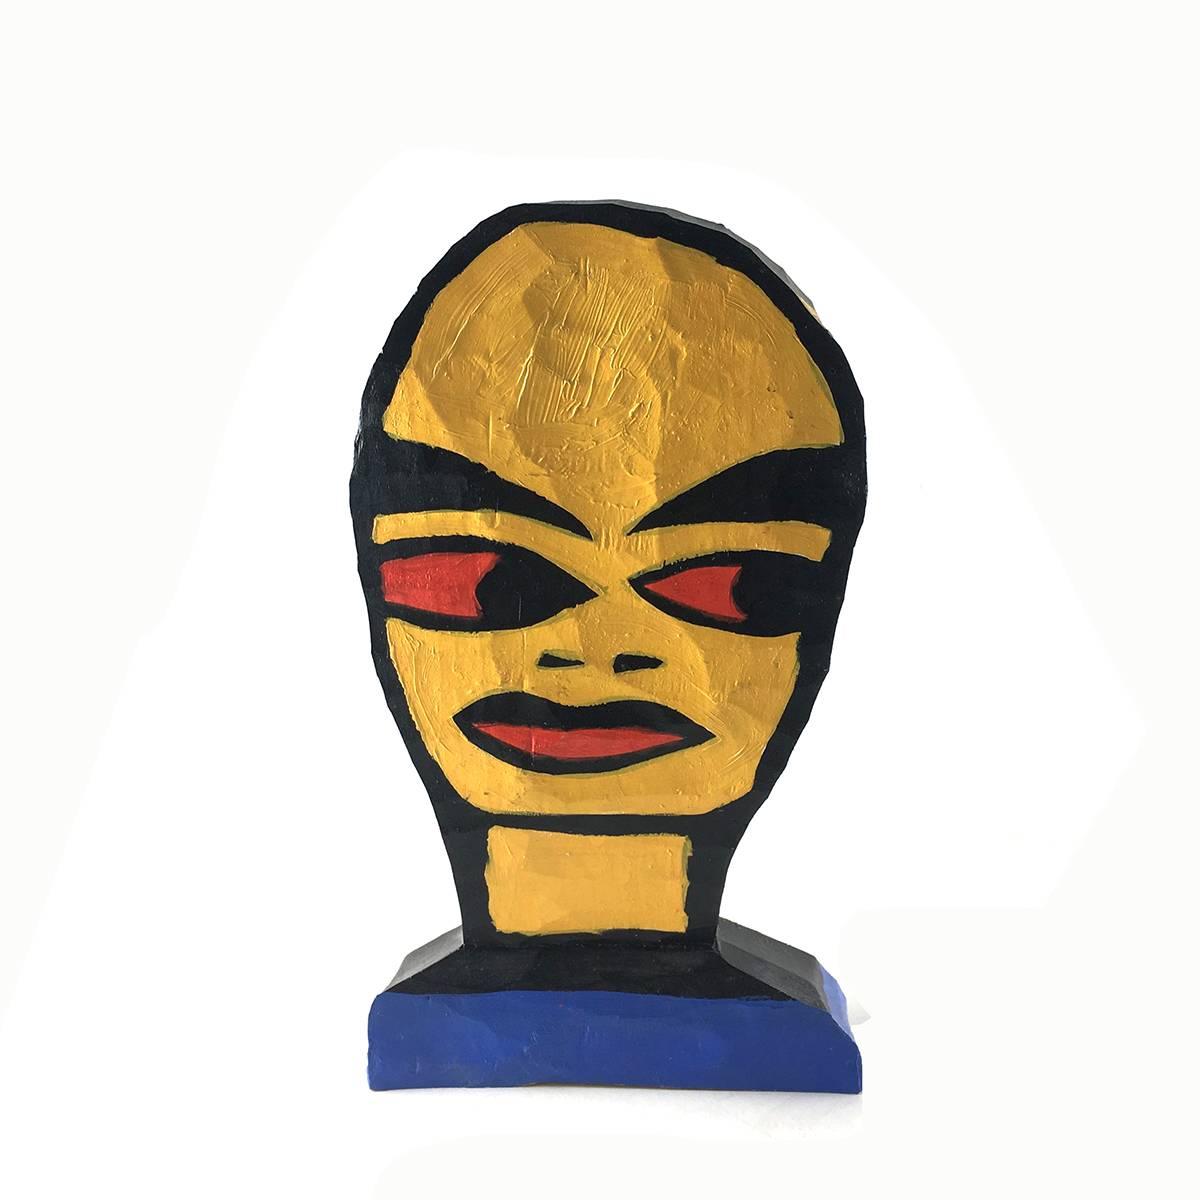 Tom Cramer contemporary art wood sculpture superhero TOTEM mask

Carved of white pine. The sculpture is a stylized head, painted in bright primary colors red, yellow and blue, with black outlines.

Signed T.C. '97 and Tom Cramer '97 and with